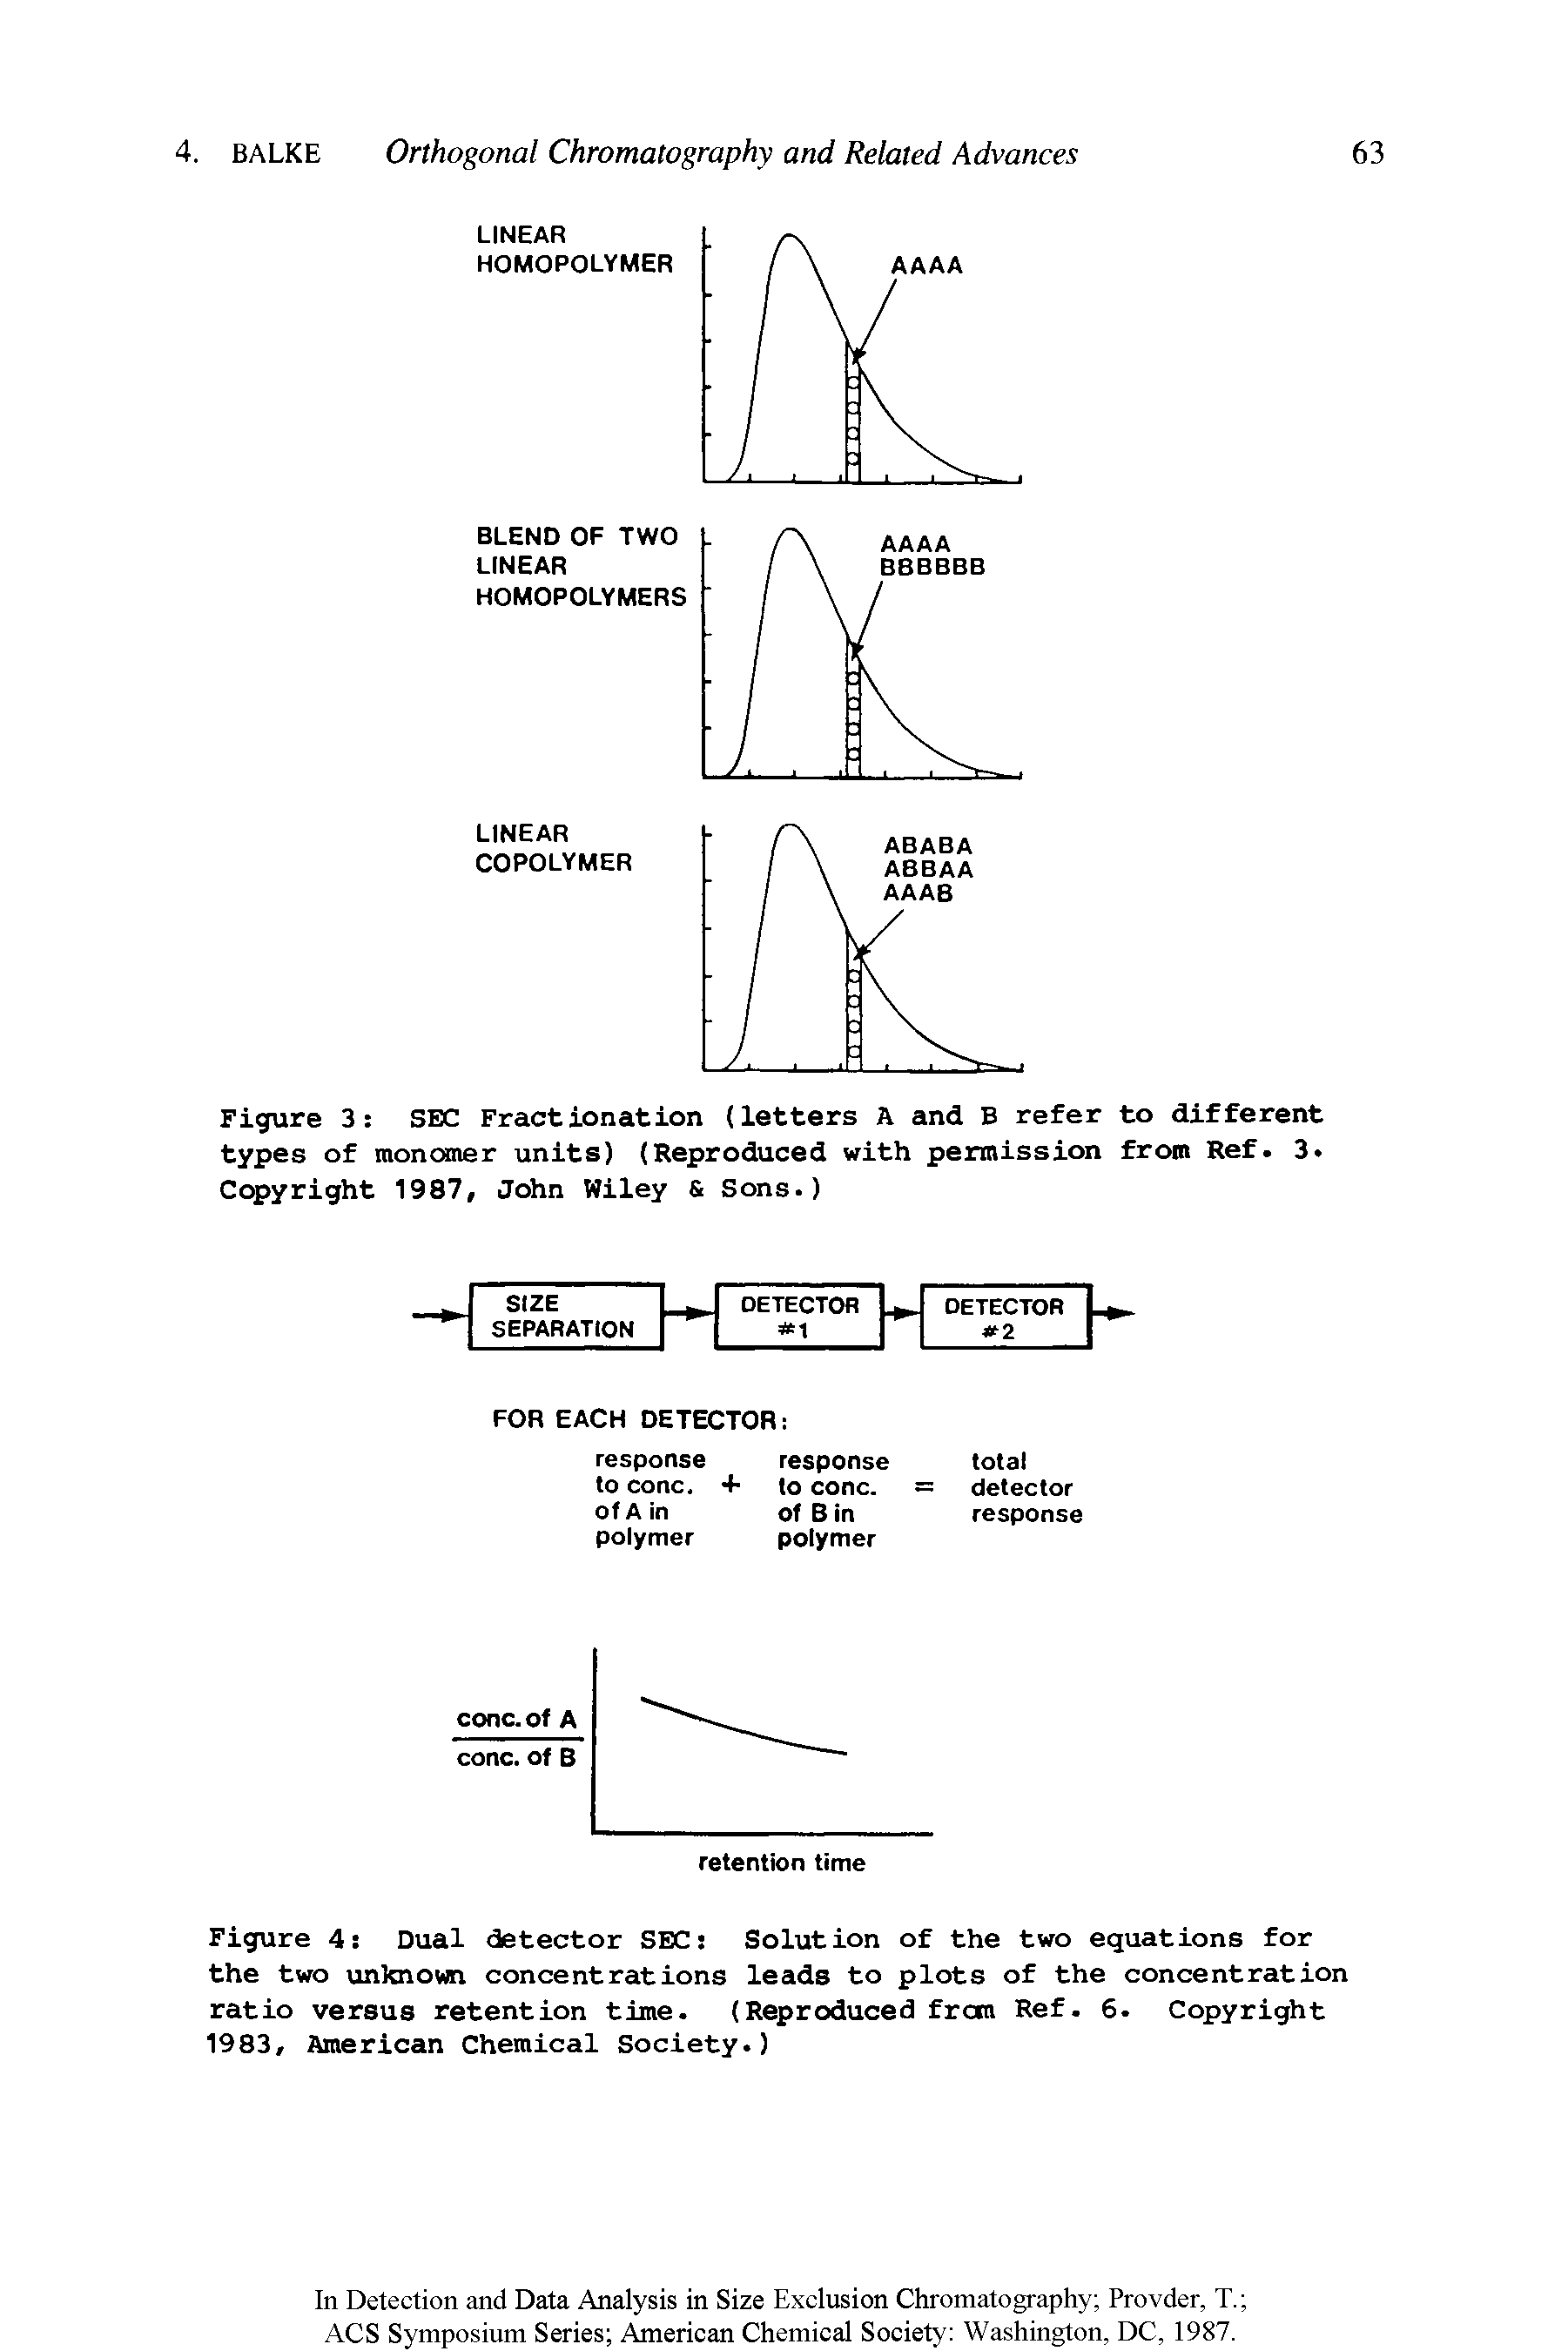 Figure 4 Dual detector SECs Solution of the two equations for the two unknown concentrations leads to plots of the concentration ratio versus retention time. (Reproduced frcni Ref. 6. Copyright 1983, American Chemical Society.)...